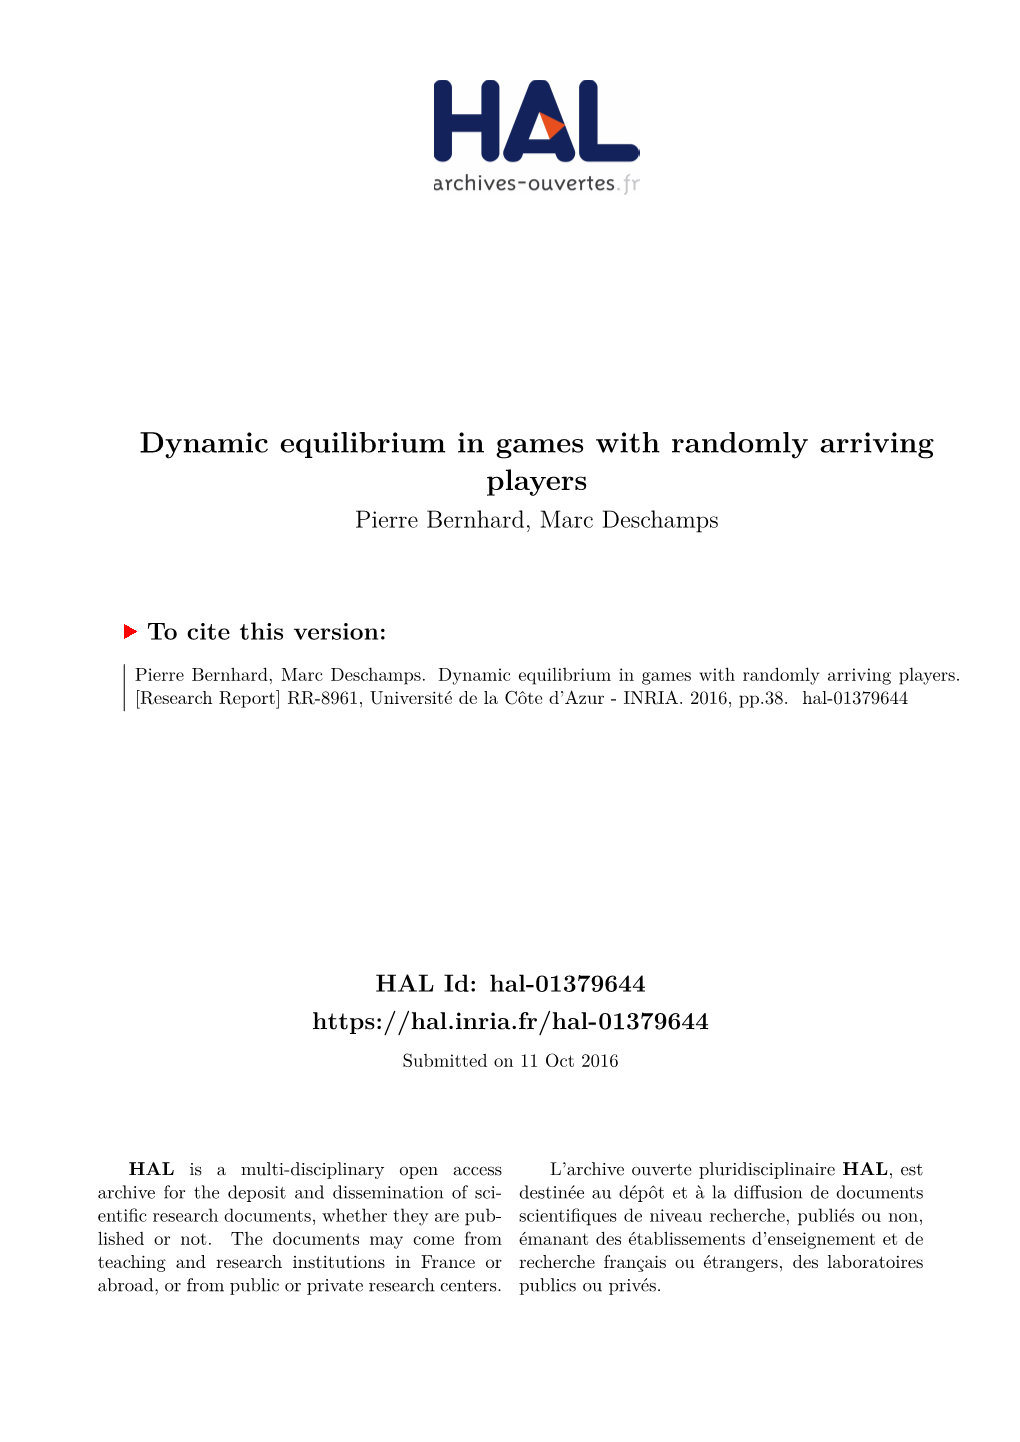 Dynamic Equilibrium in Games with Randomly Arriving Players Pierre Bernhard, Marc Deschamps